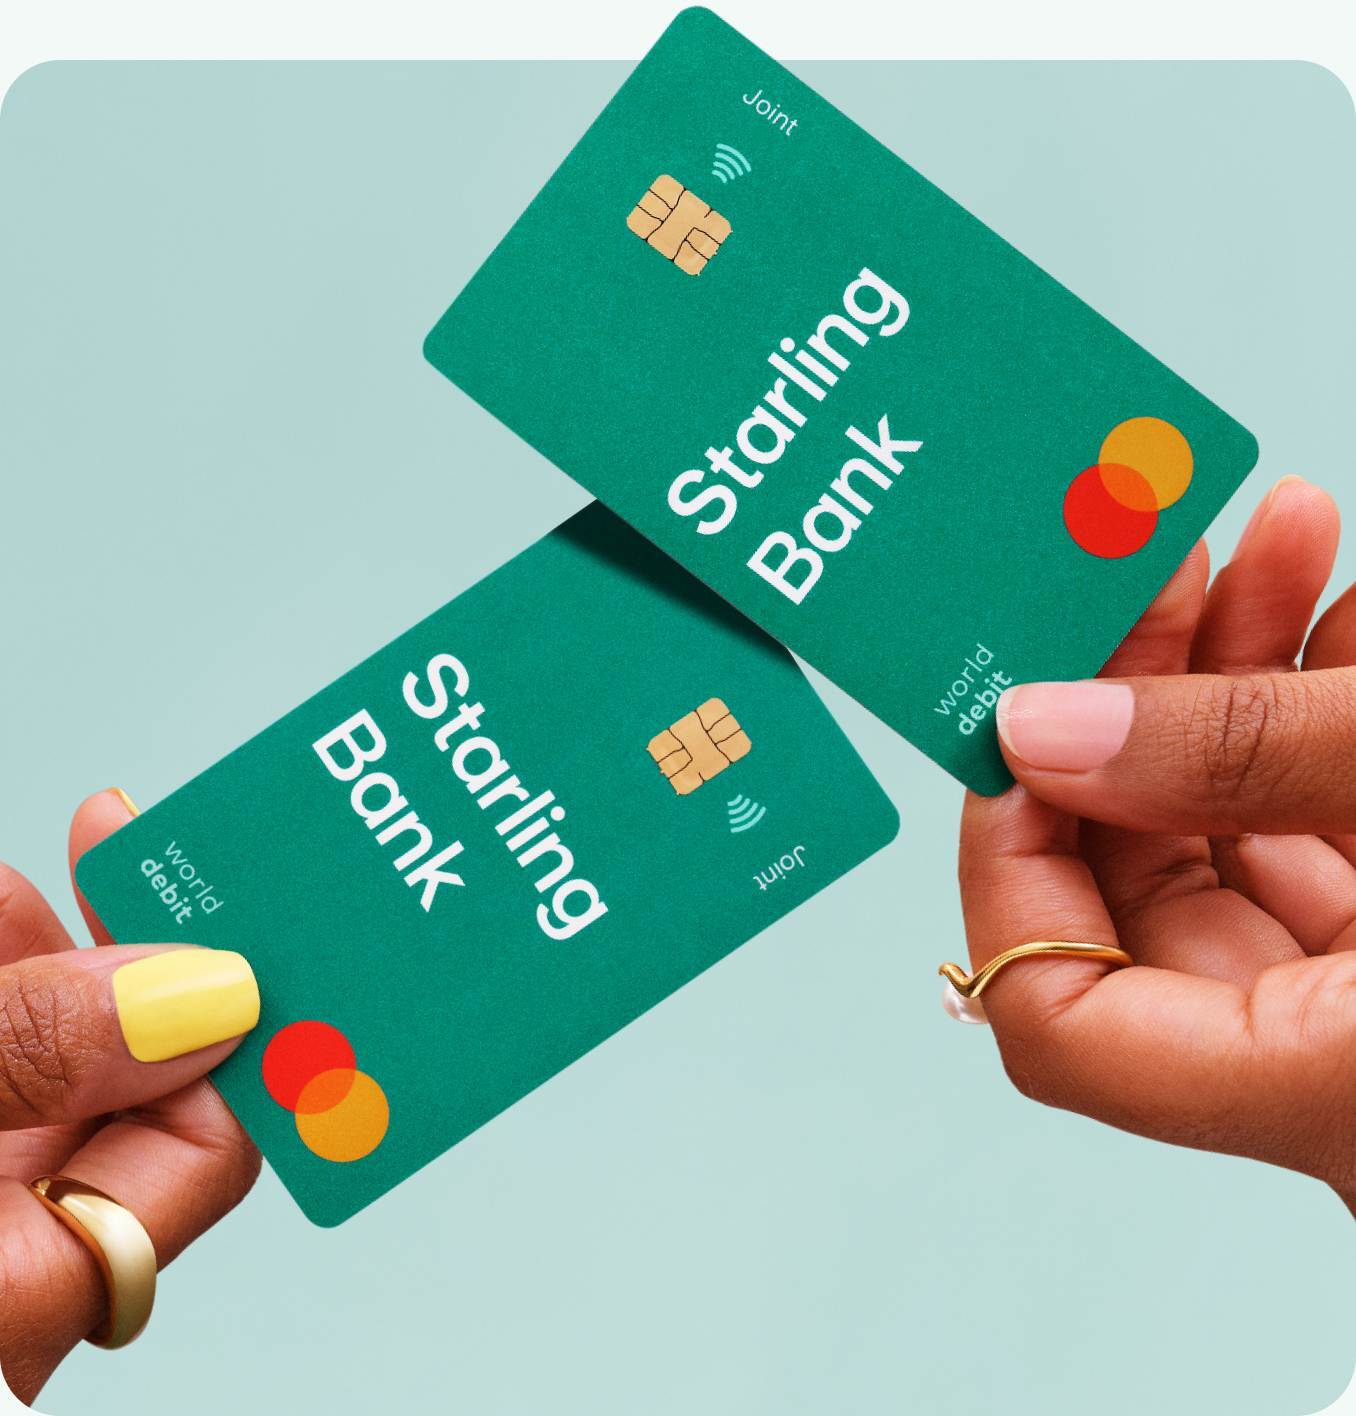 2 green coloured Starling Bank joint account debit cards